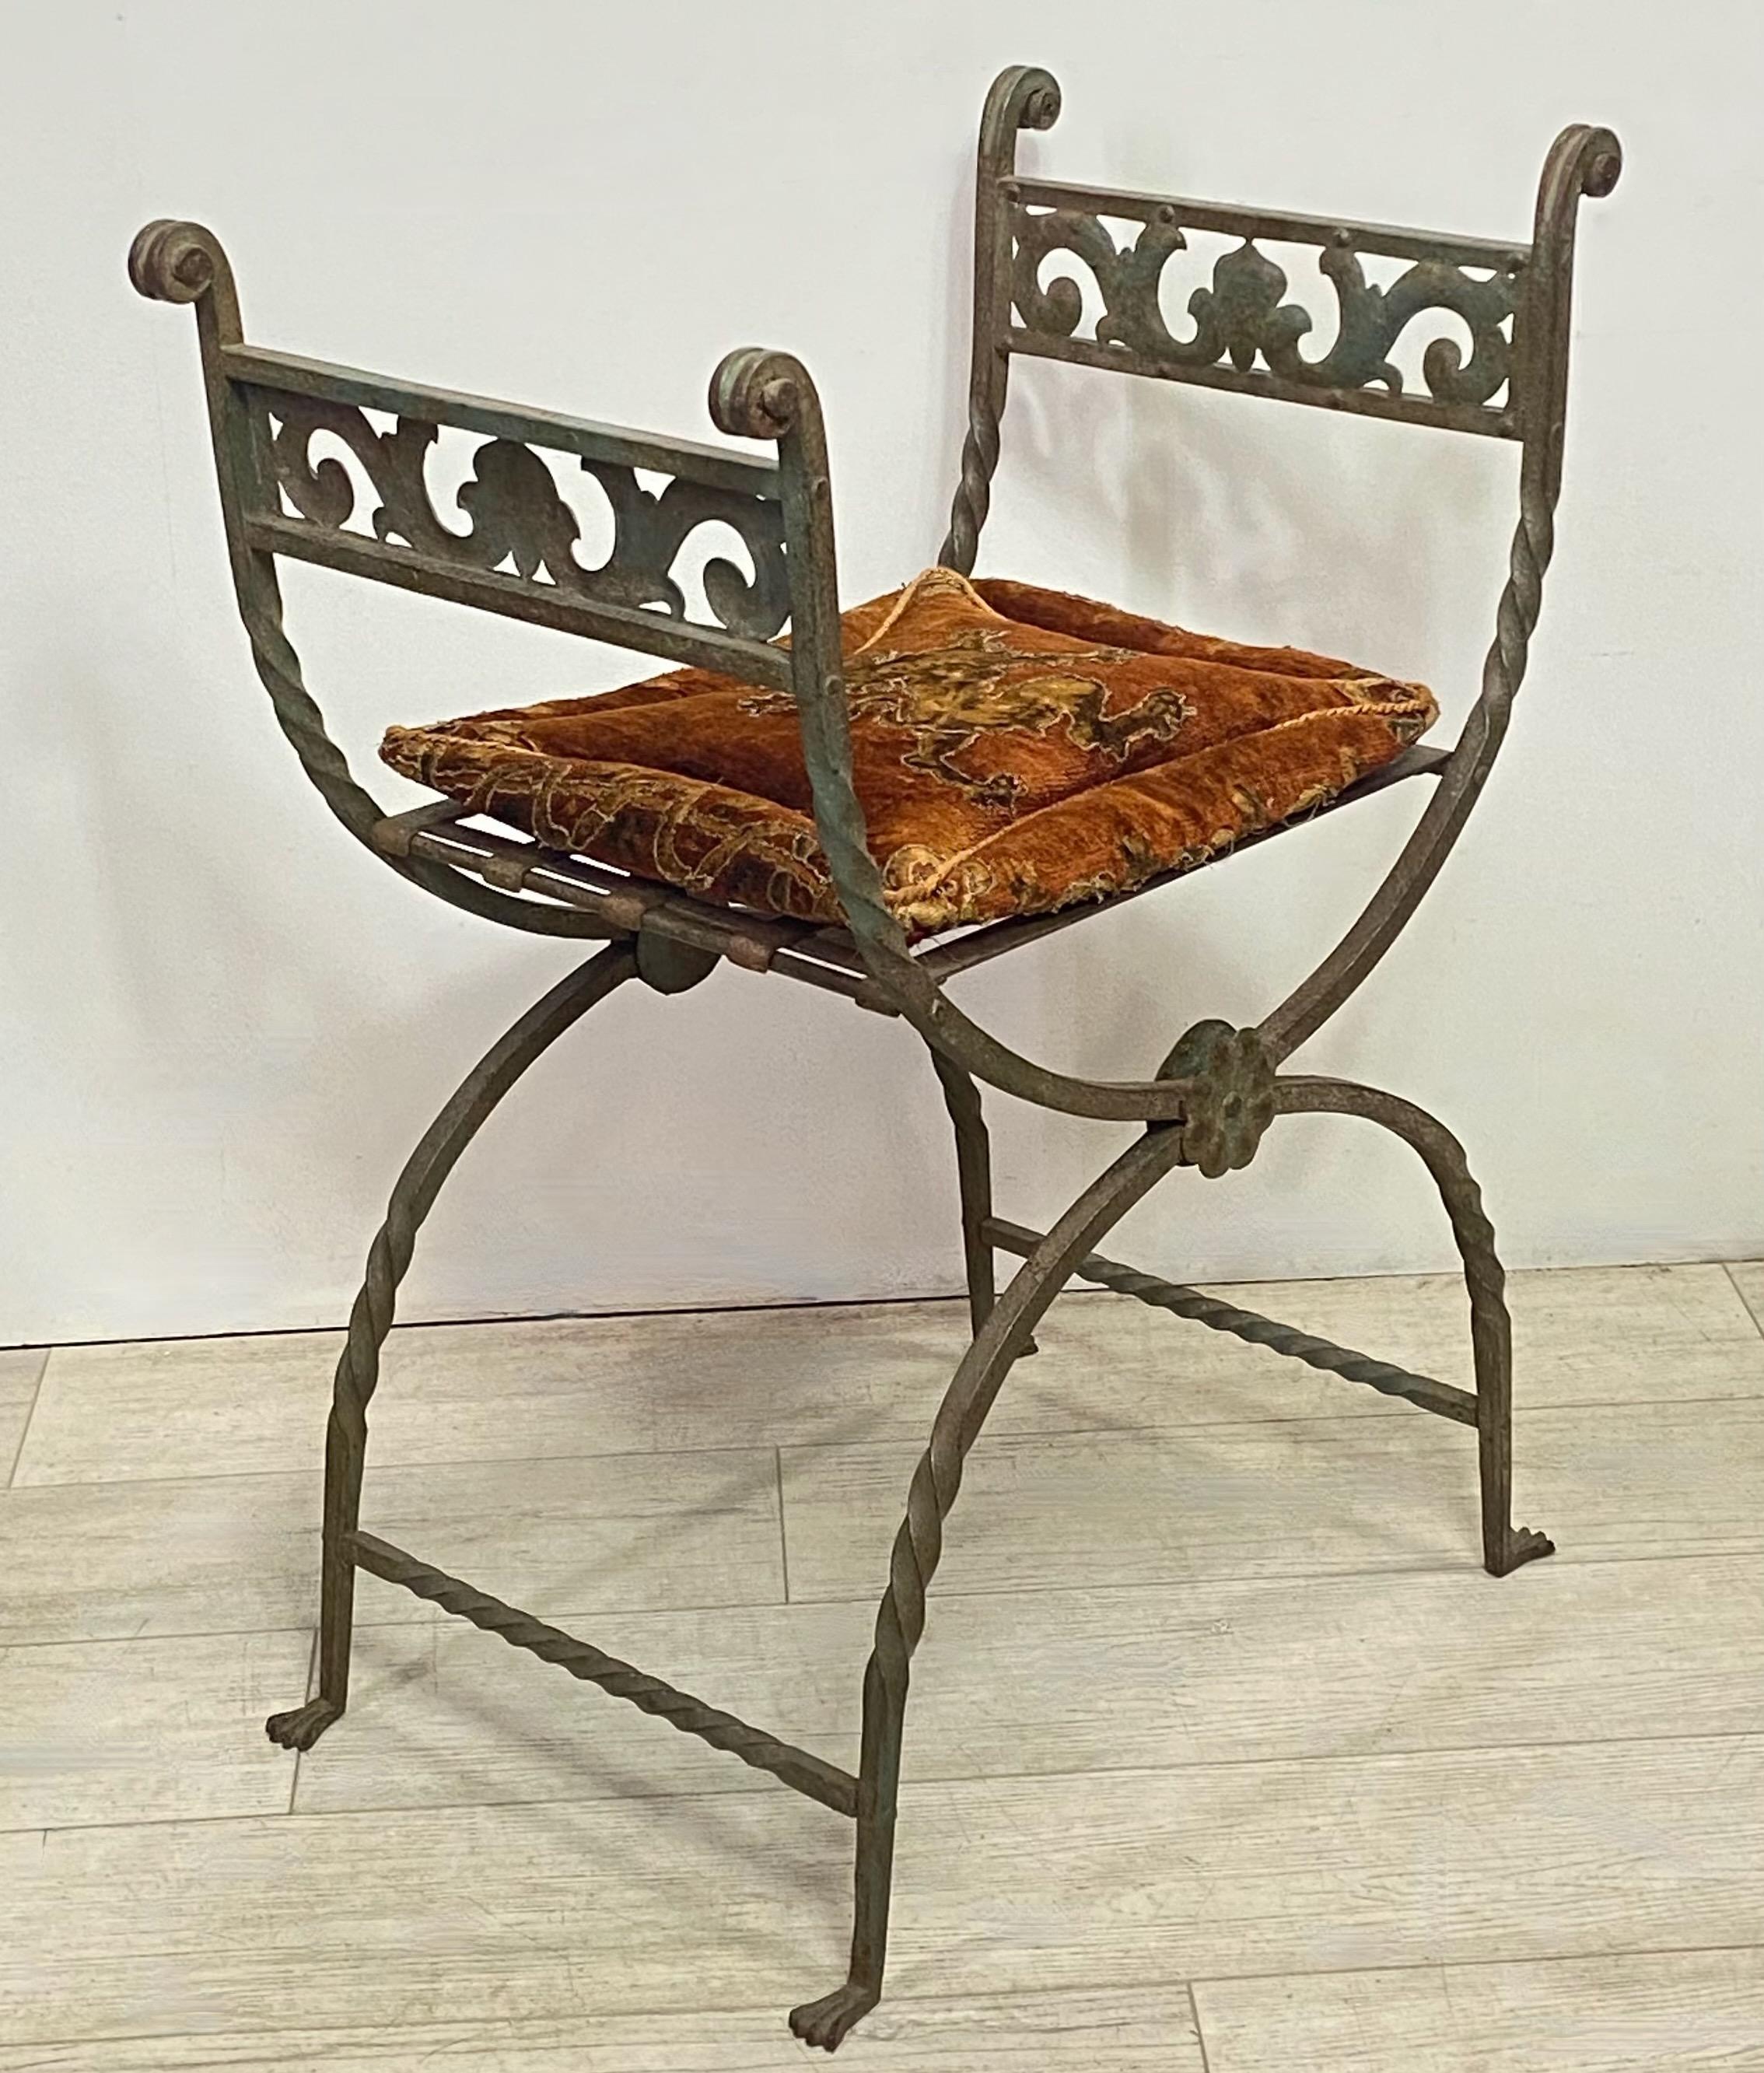 Renaissance Antique Italian Wrought Iron Curule Style Stool or Chair, 19th Century